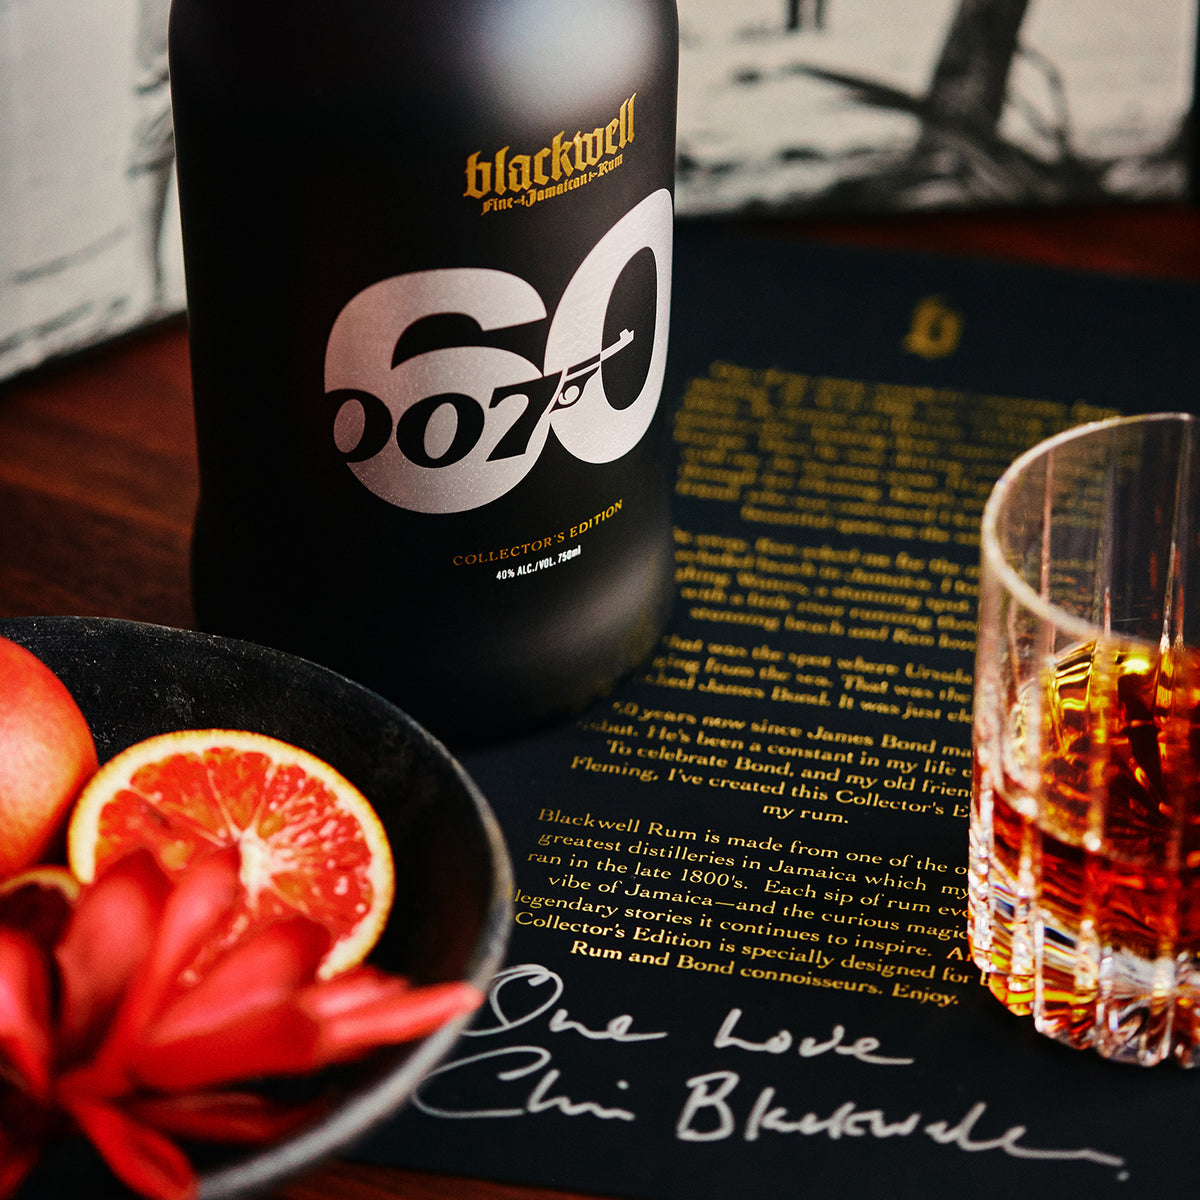 James Bond Jamaican Rum - Signed &amp; Numbered Edition - By Blackwell Rum